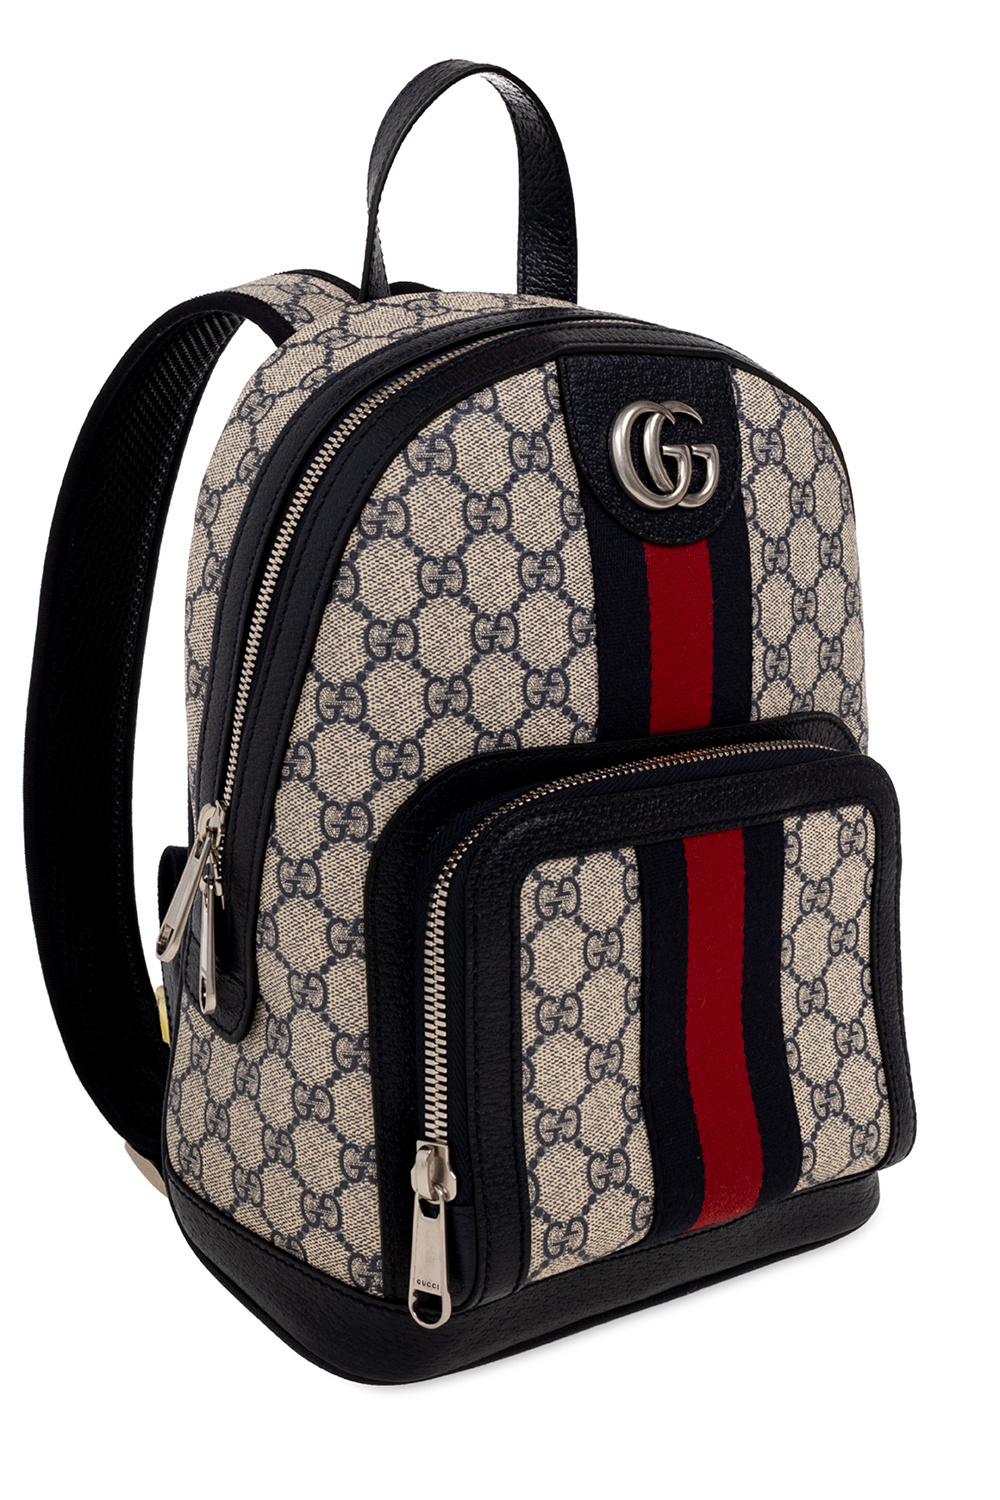 Gucci ‘Ophidia Small’ Brulpack